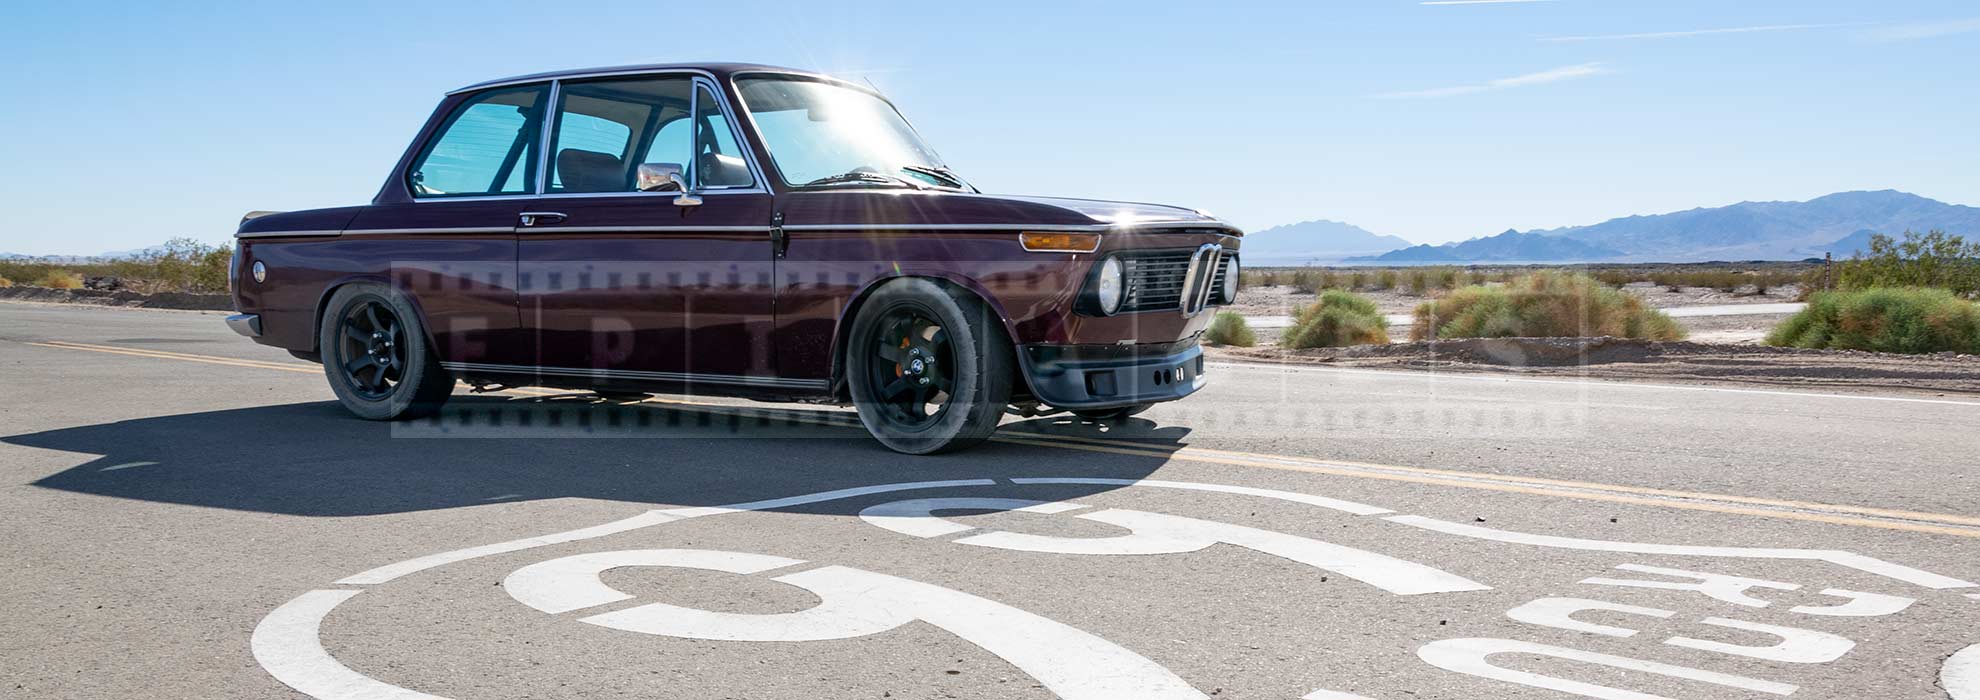 Classic BMW 2002 and route 66